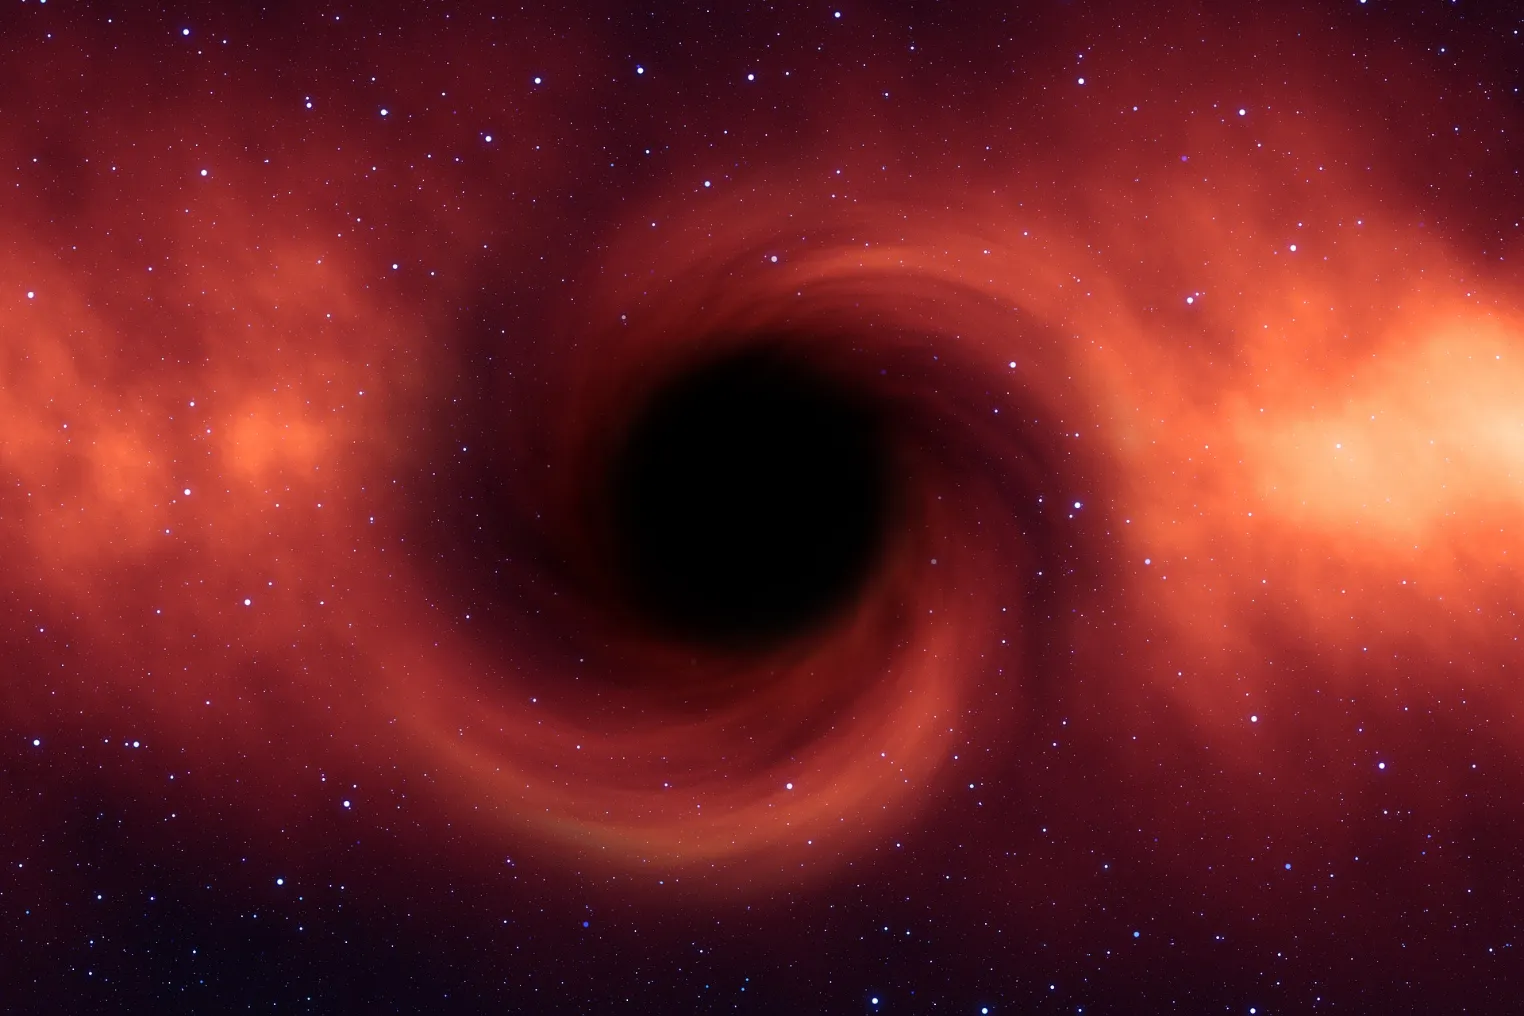 A star-filled space reveals a central black hole, the enigmatic abyss of the universe.